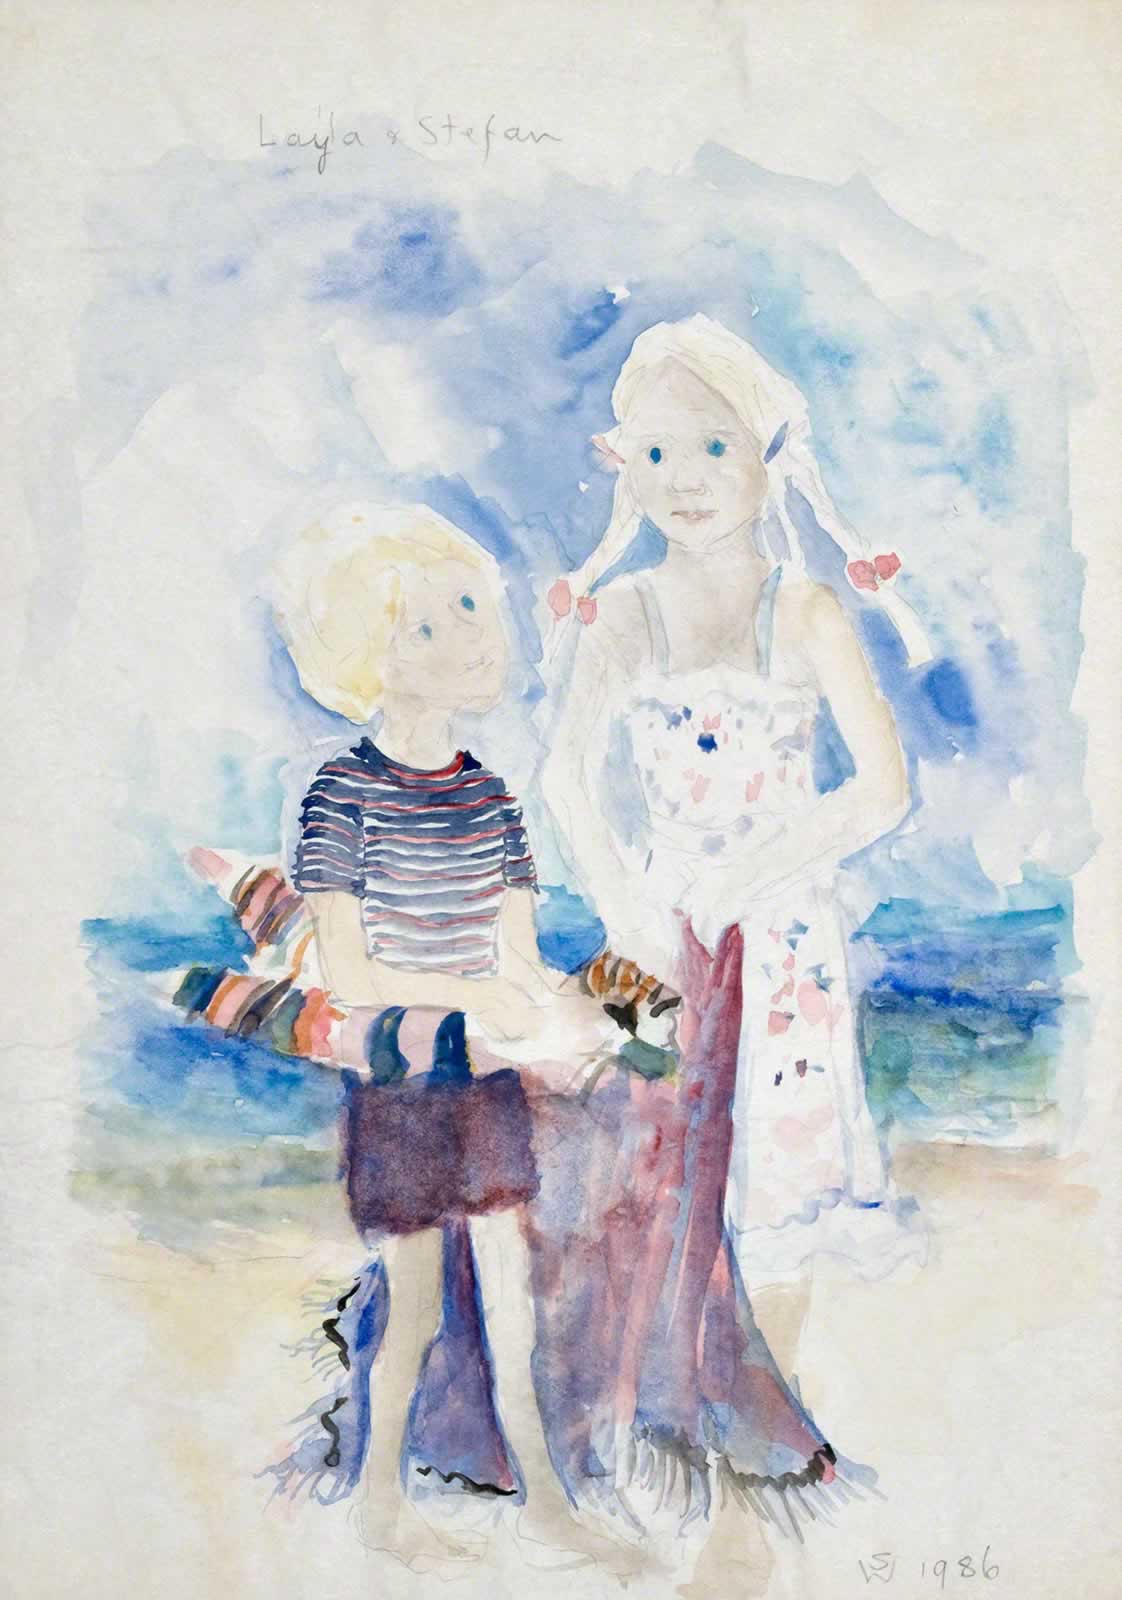 Leyla and Stefan at the Beach by Susan Dorothea White